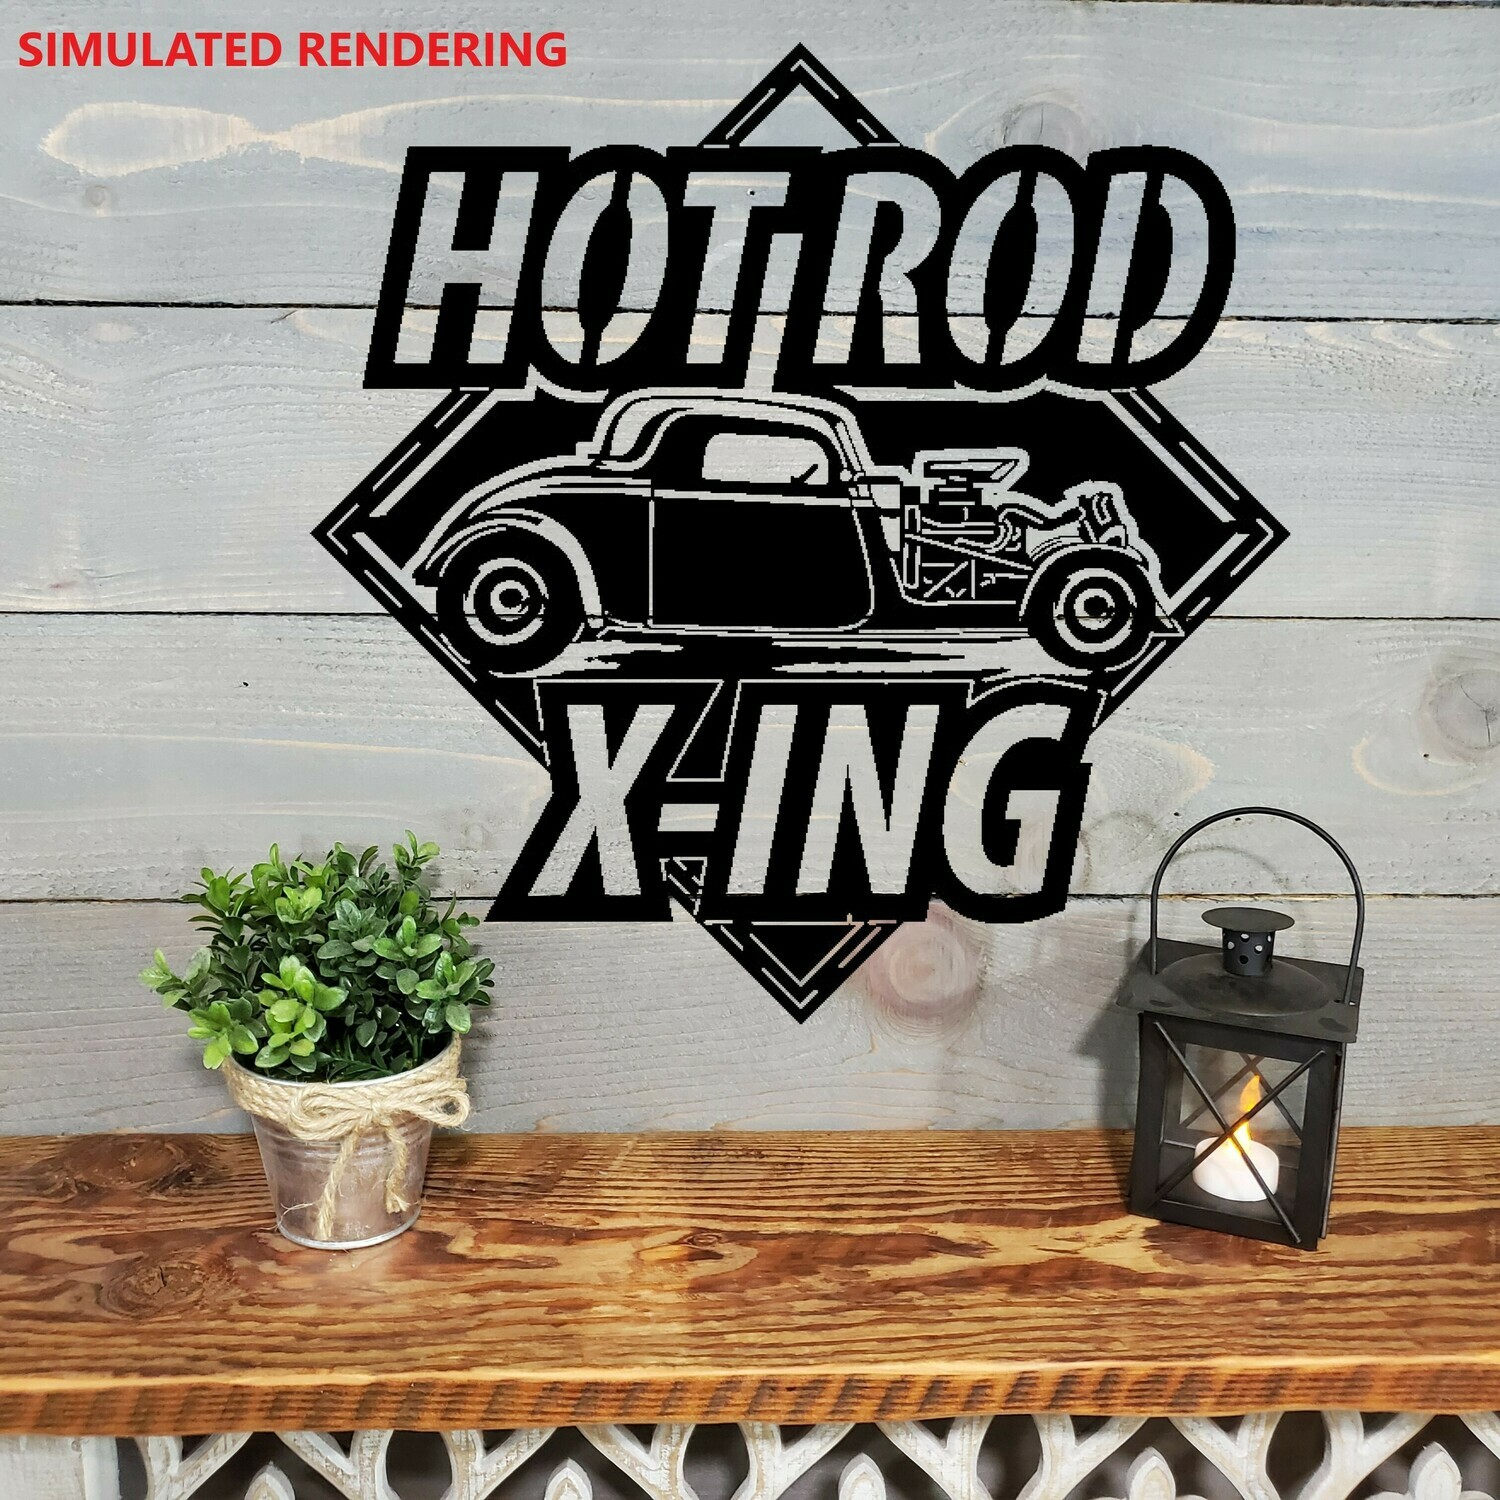 HOT ROD X-ING, VEHICLE COLLECTION